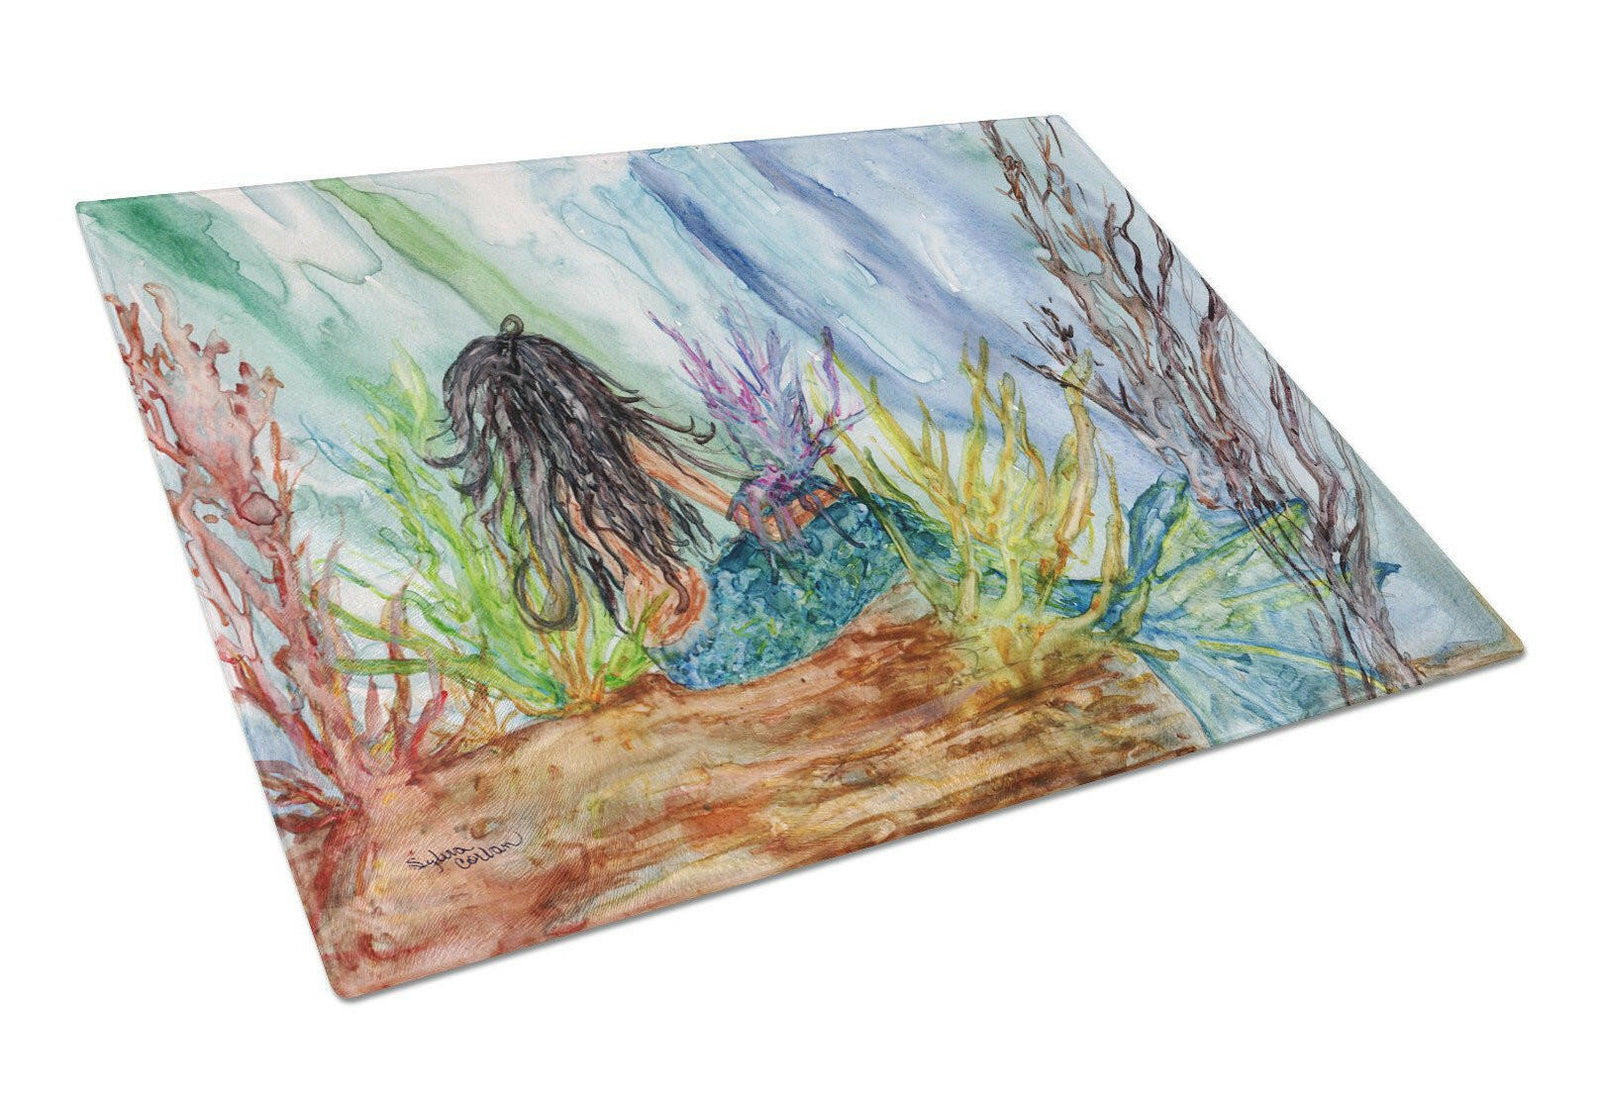 Black Haired Mermaid Water Fantasy Glass Cutting Board Large 8974LCB by Caroline's Treasures